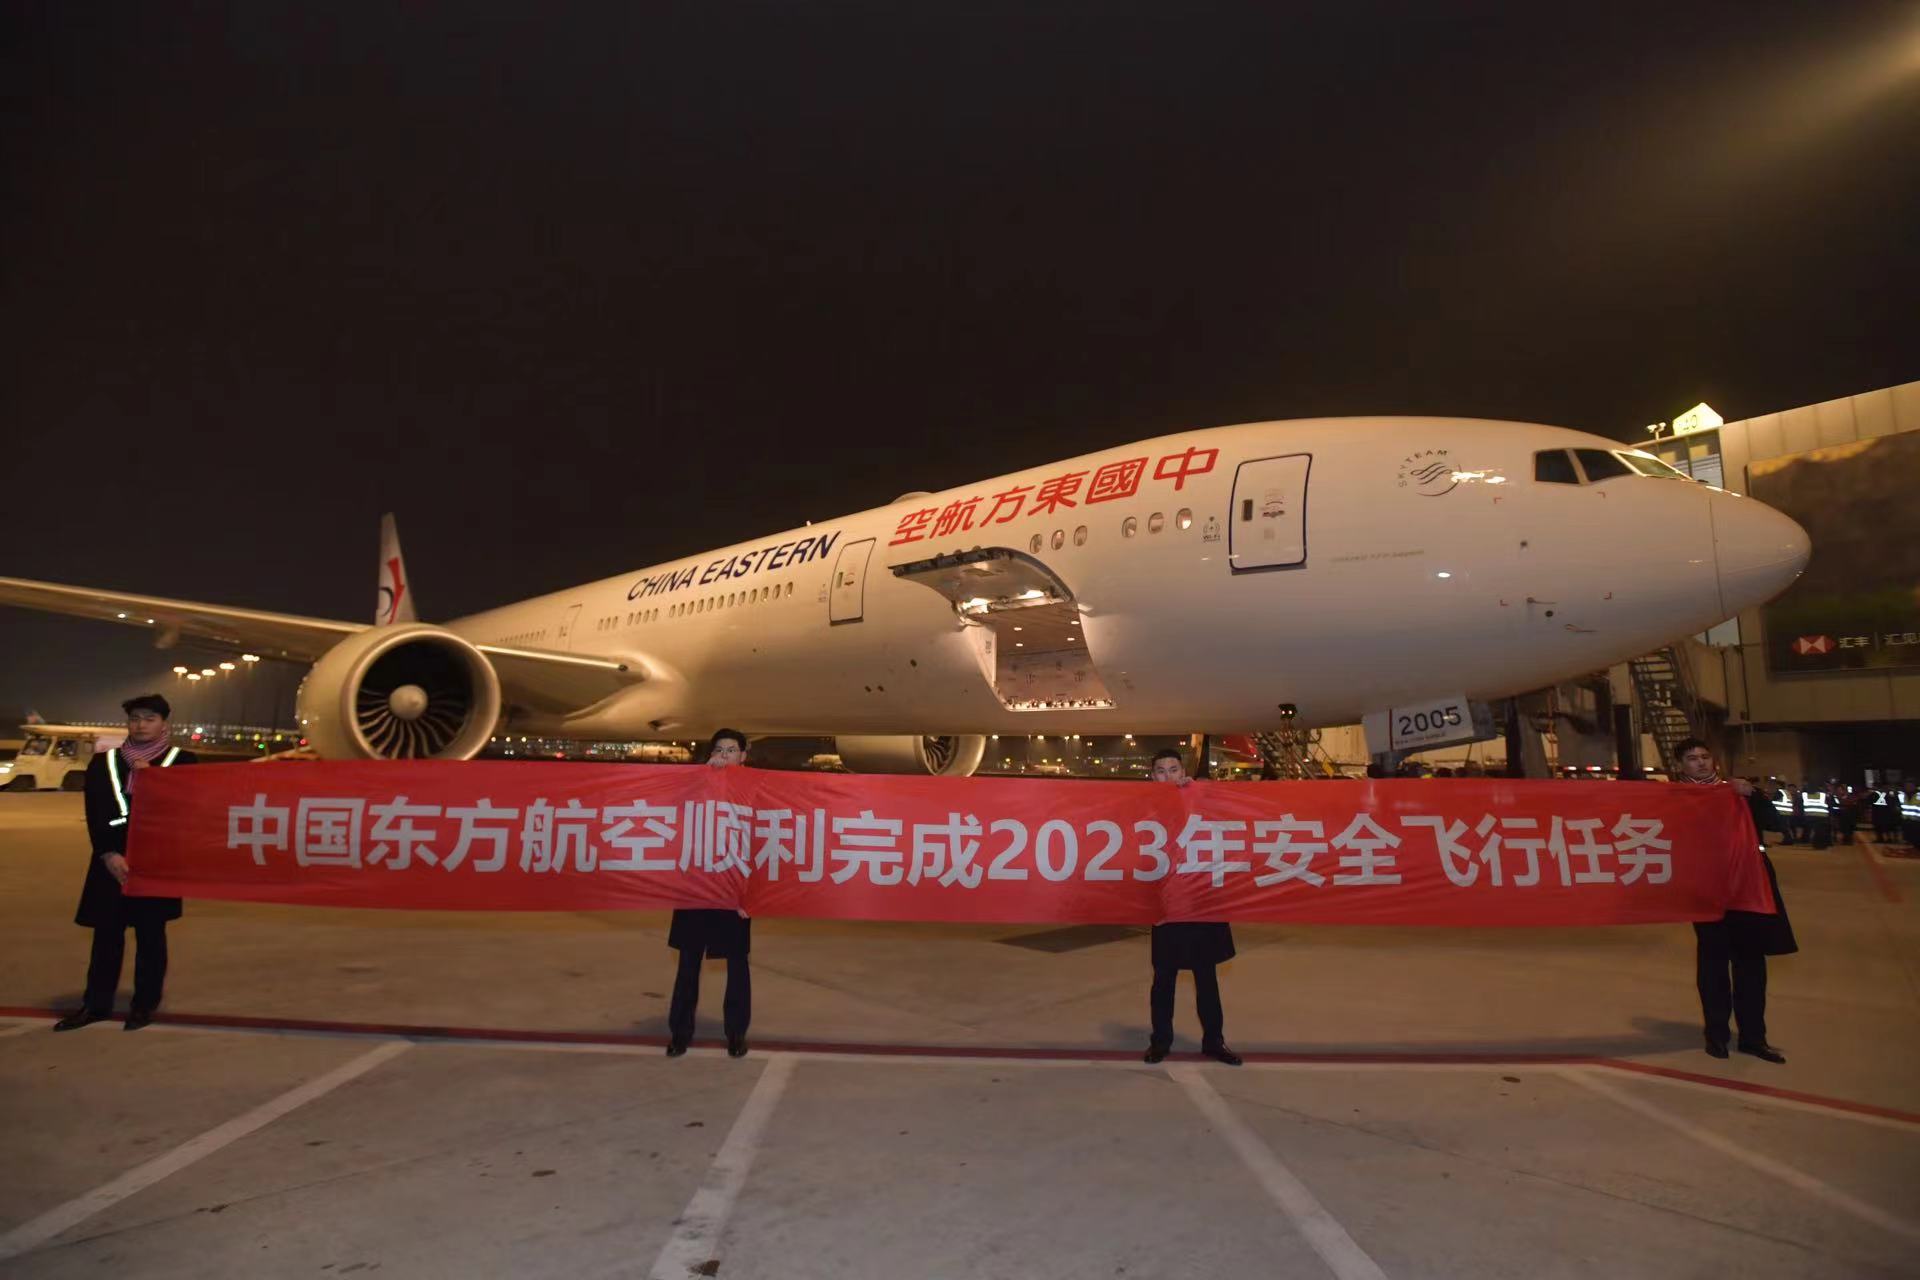 China Eastern Airlines was successfully ended in 2023： the world's first investment in C919, and the carrier returned to the 100 million person -time steps